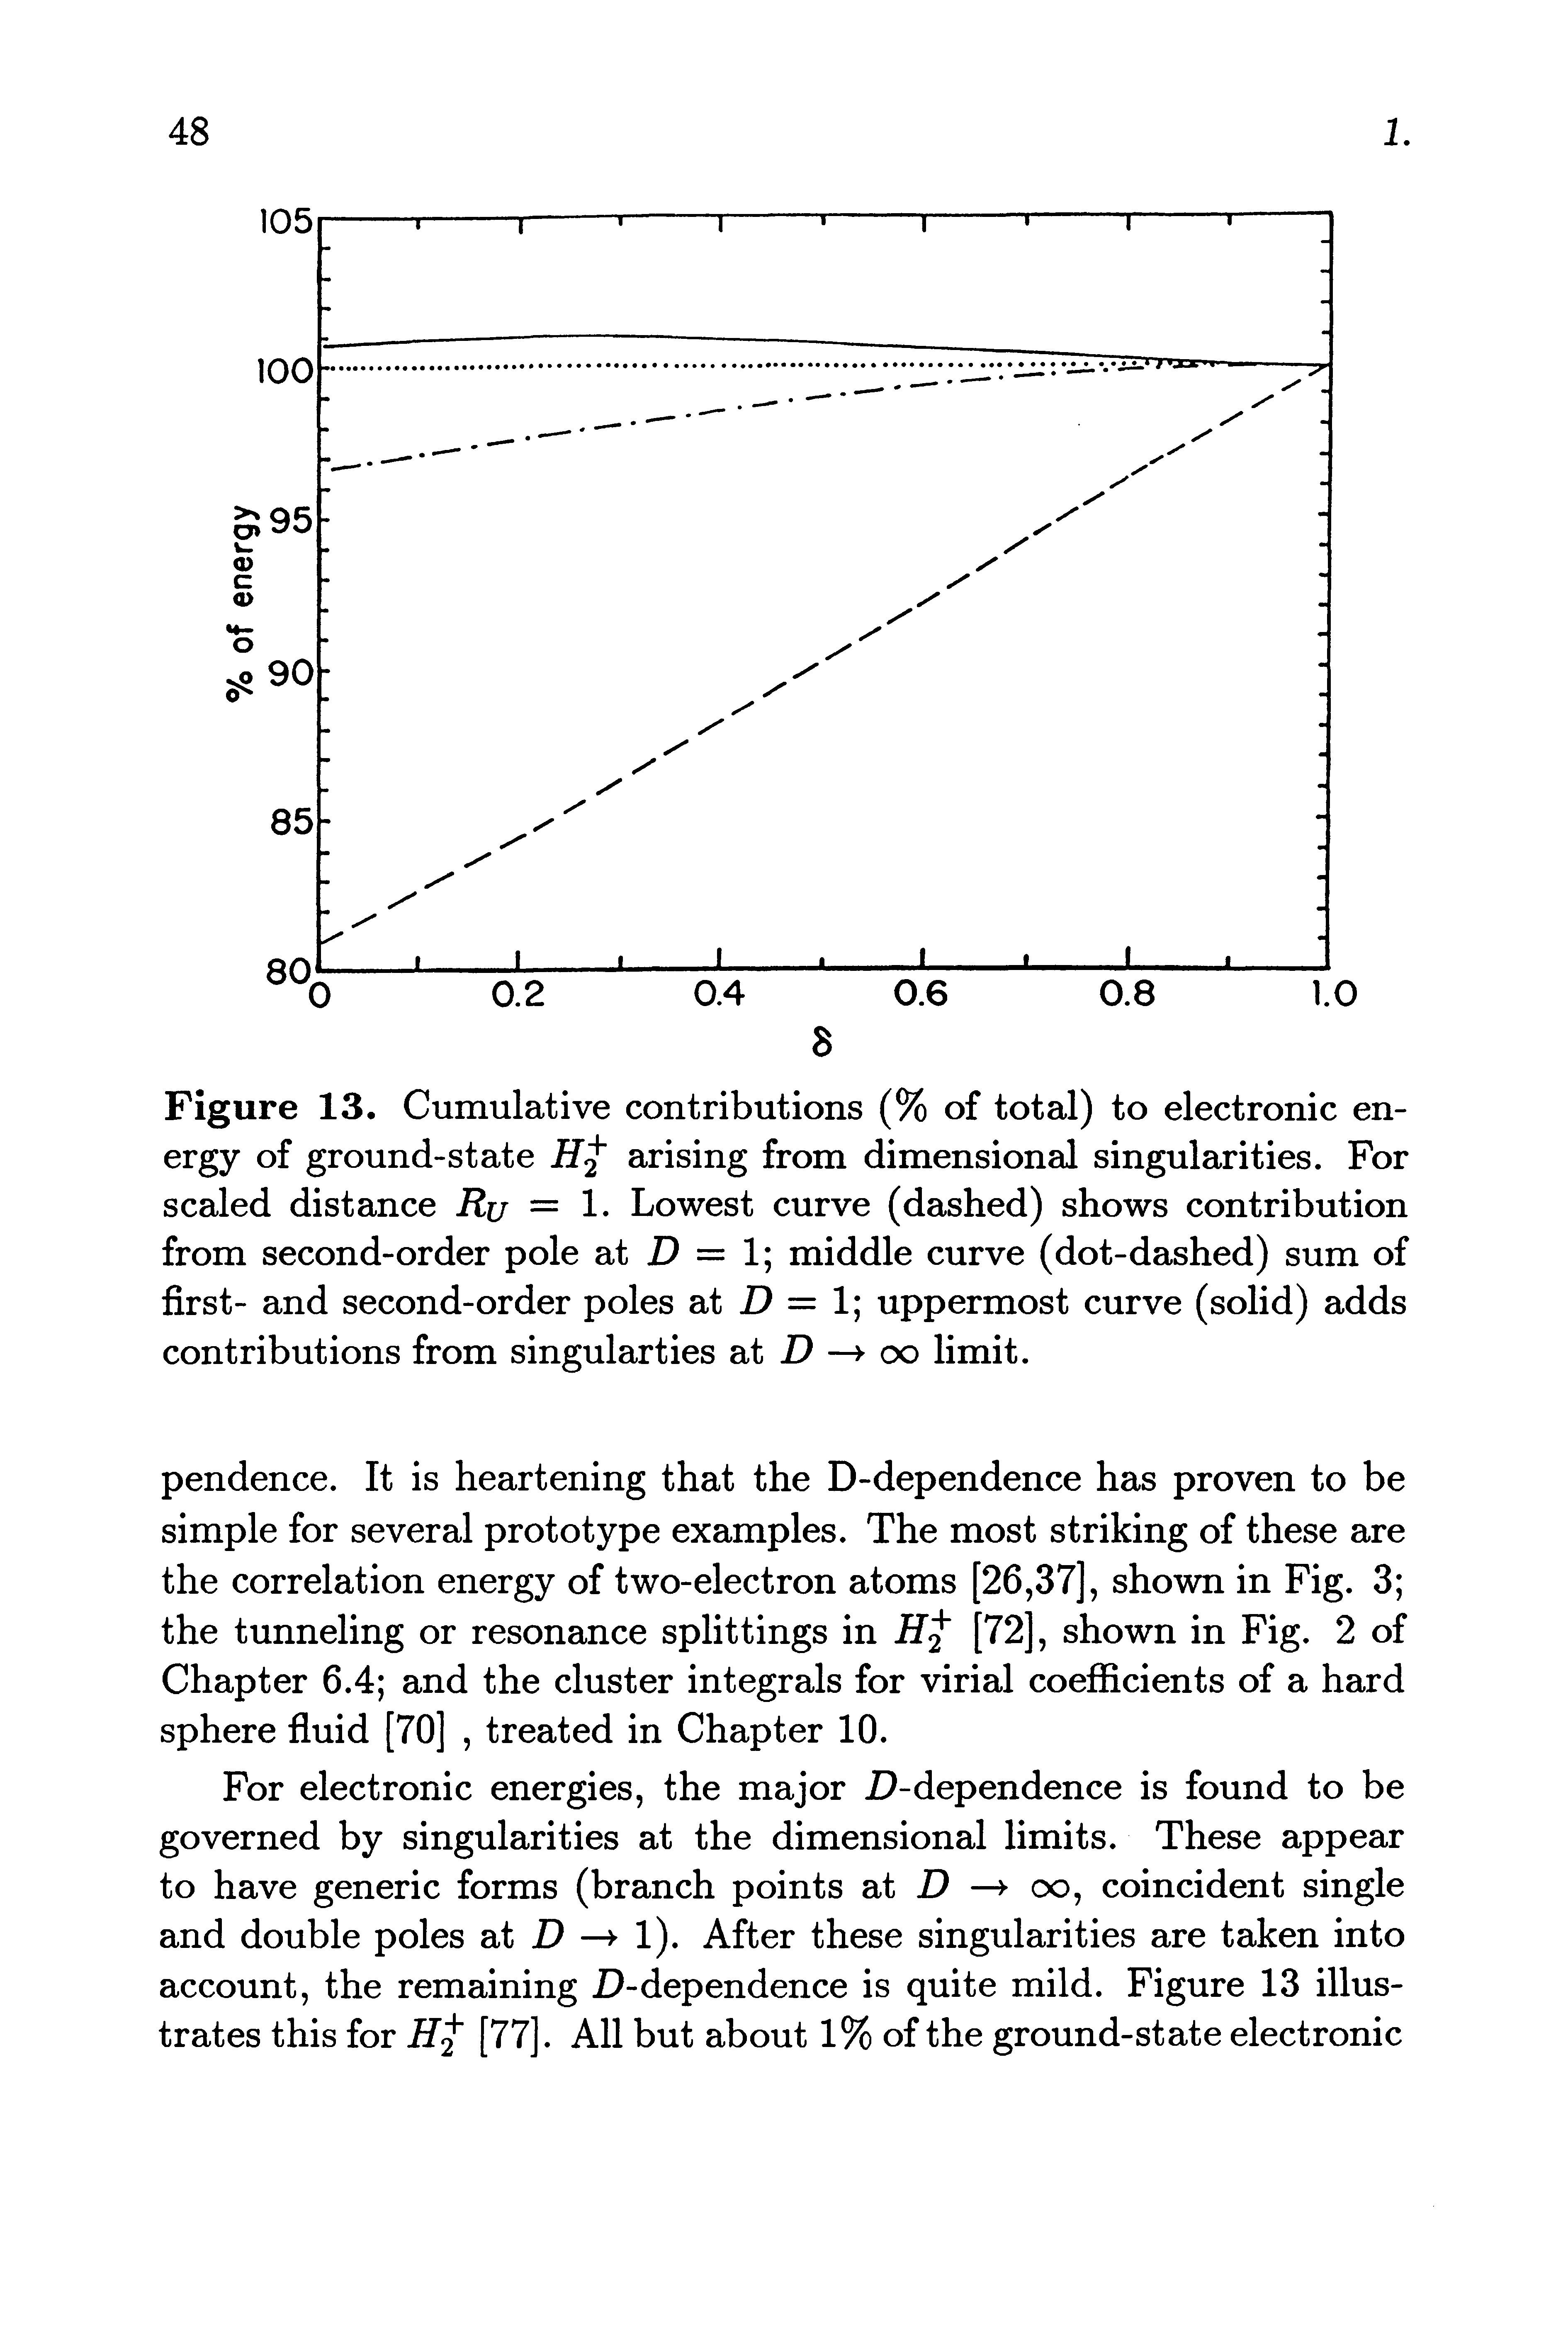 Figure 13. Cumulative contributions (% of total) to electronic energy of ground-state H2 arising from dimensional singularities. For scaled distance Ru = 1. Lowest curve (dashed) shows contribution from second-order pole at U = 1 middle curve (dot-dashed) sum of first- and second-order poles at > = 1 uppermost curve (solid) adds contributions from singularties at 00 limit.